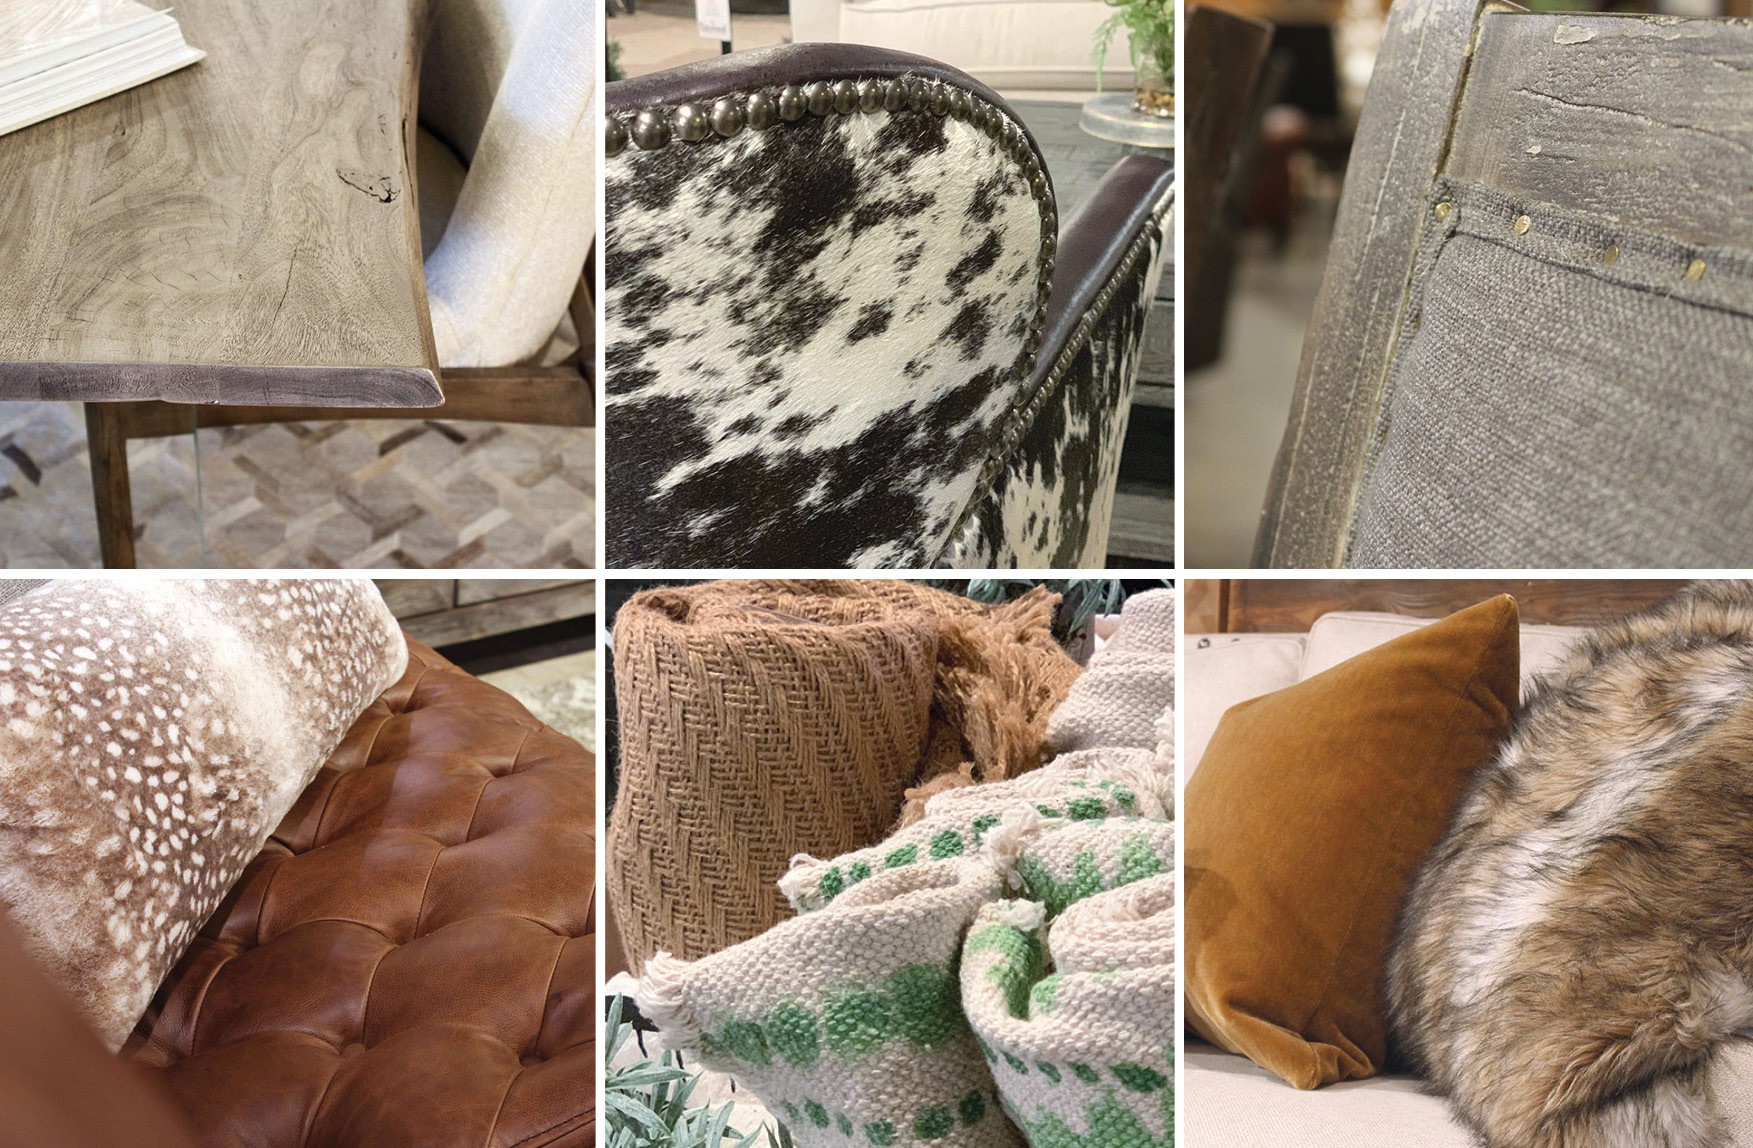 A resurgence of natural materials is a delight for designers